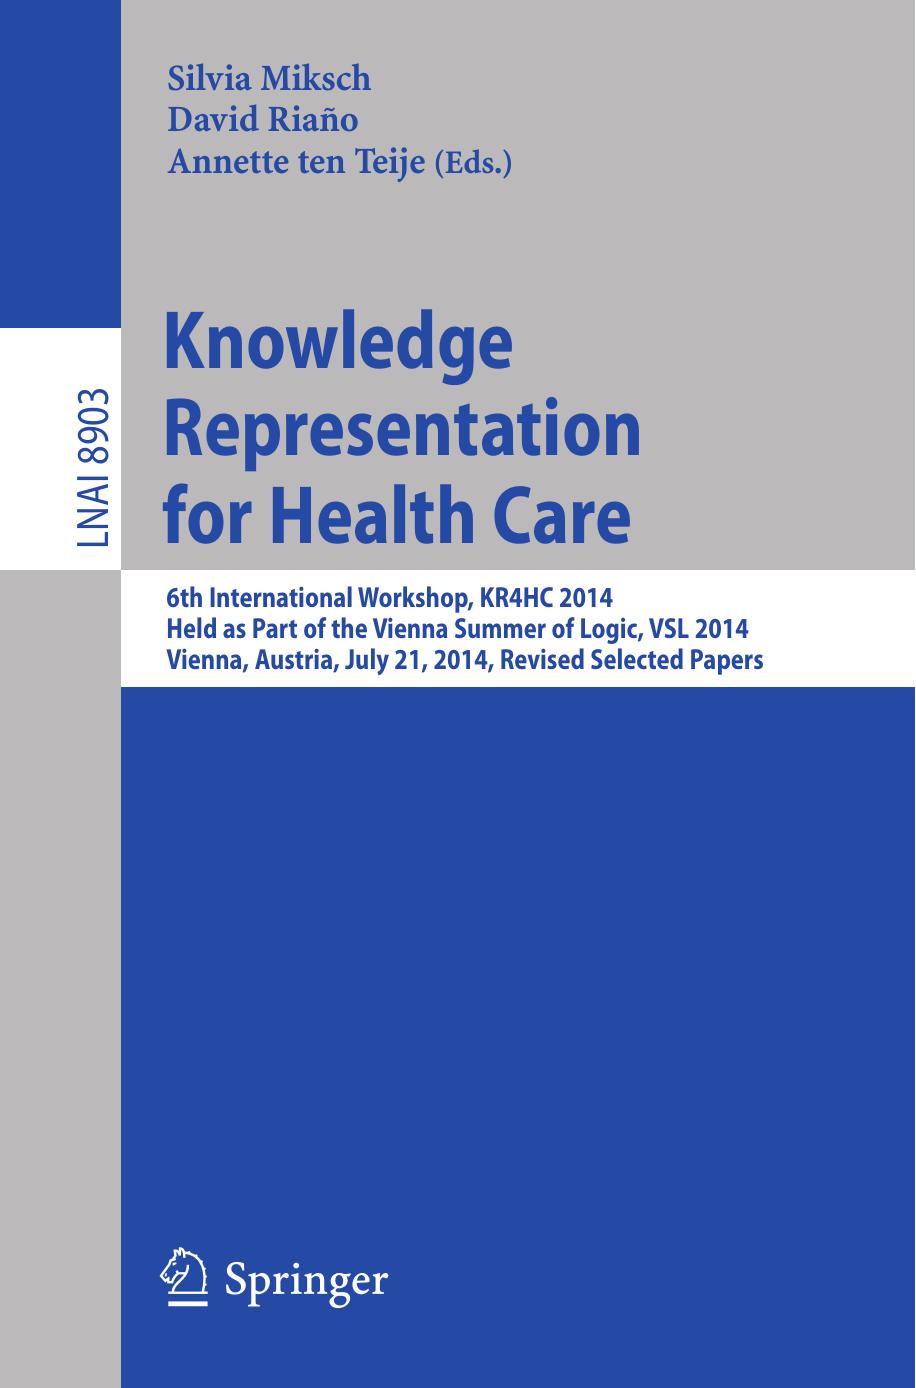 Knowledge Representation for Health Care: 6th International Workshop, KR4HC 2014, Held as Part of the Vienna Summer of Logic, VSL 2014, Vienna, Austria, July 21, 2014. Revised Selected Papers